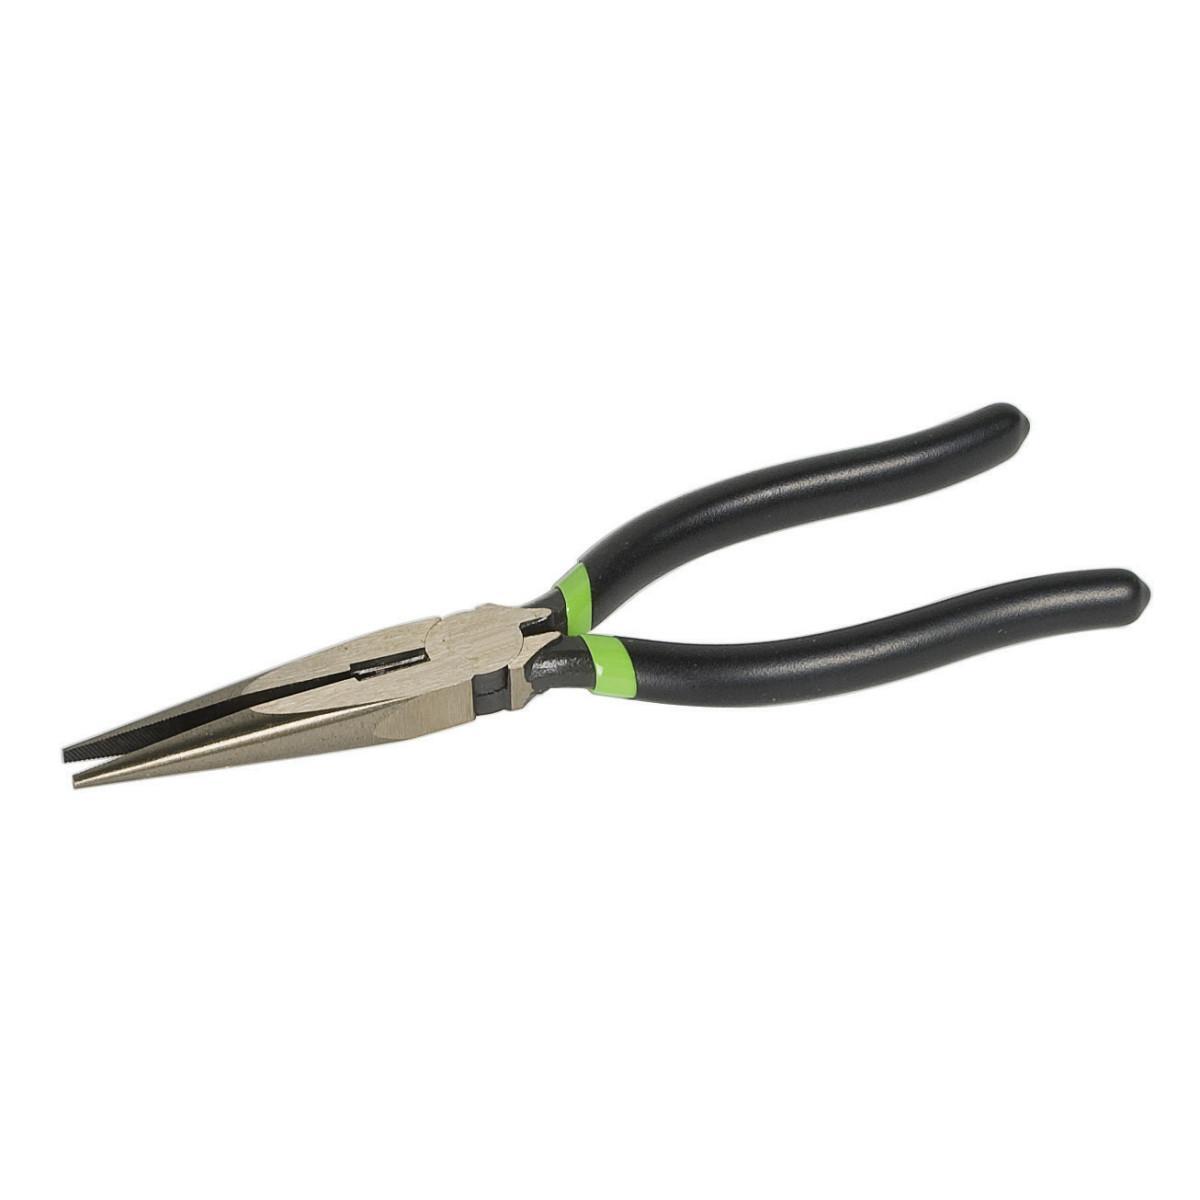 Greenlee® 0351-06M High Leverage Side Cutting Long Nose Plier, Serrated Chrome Vanadium Steel Jaw, 2-1/4 in L x 3/8 in W Jaw, 6-5/8 in OAL